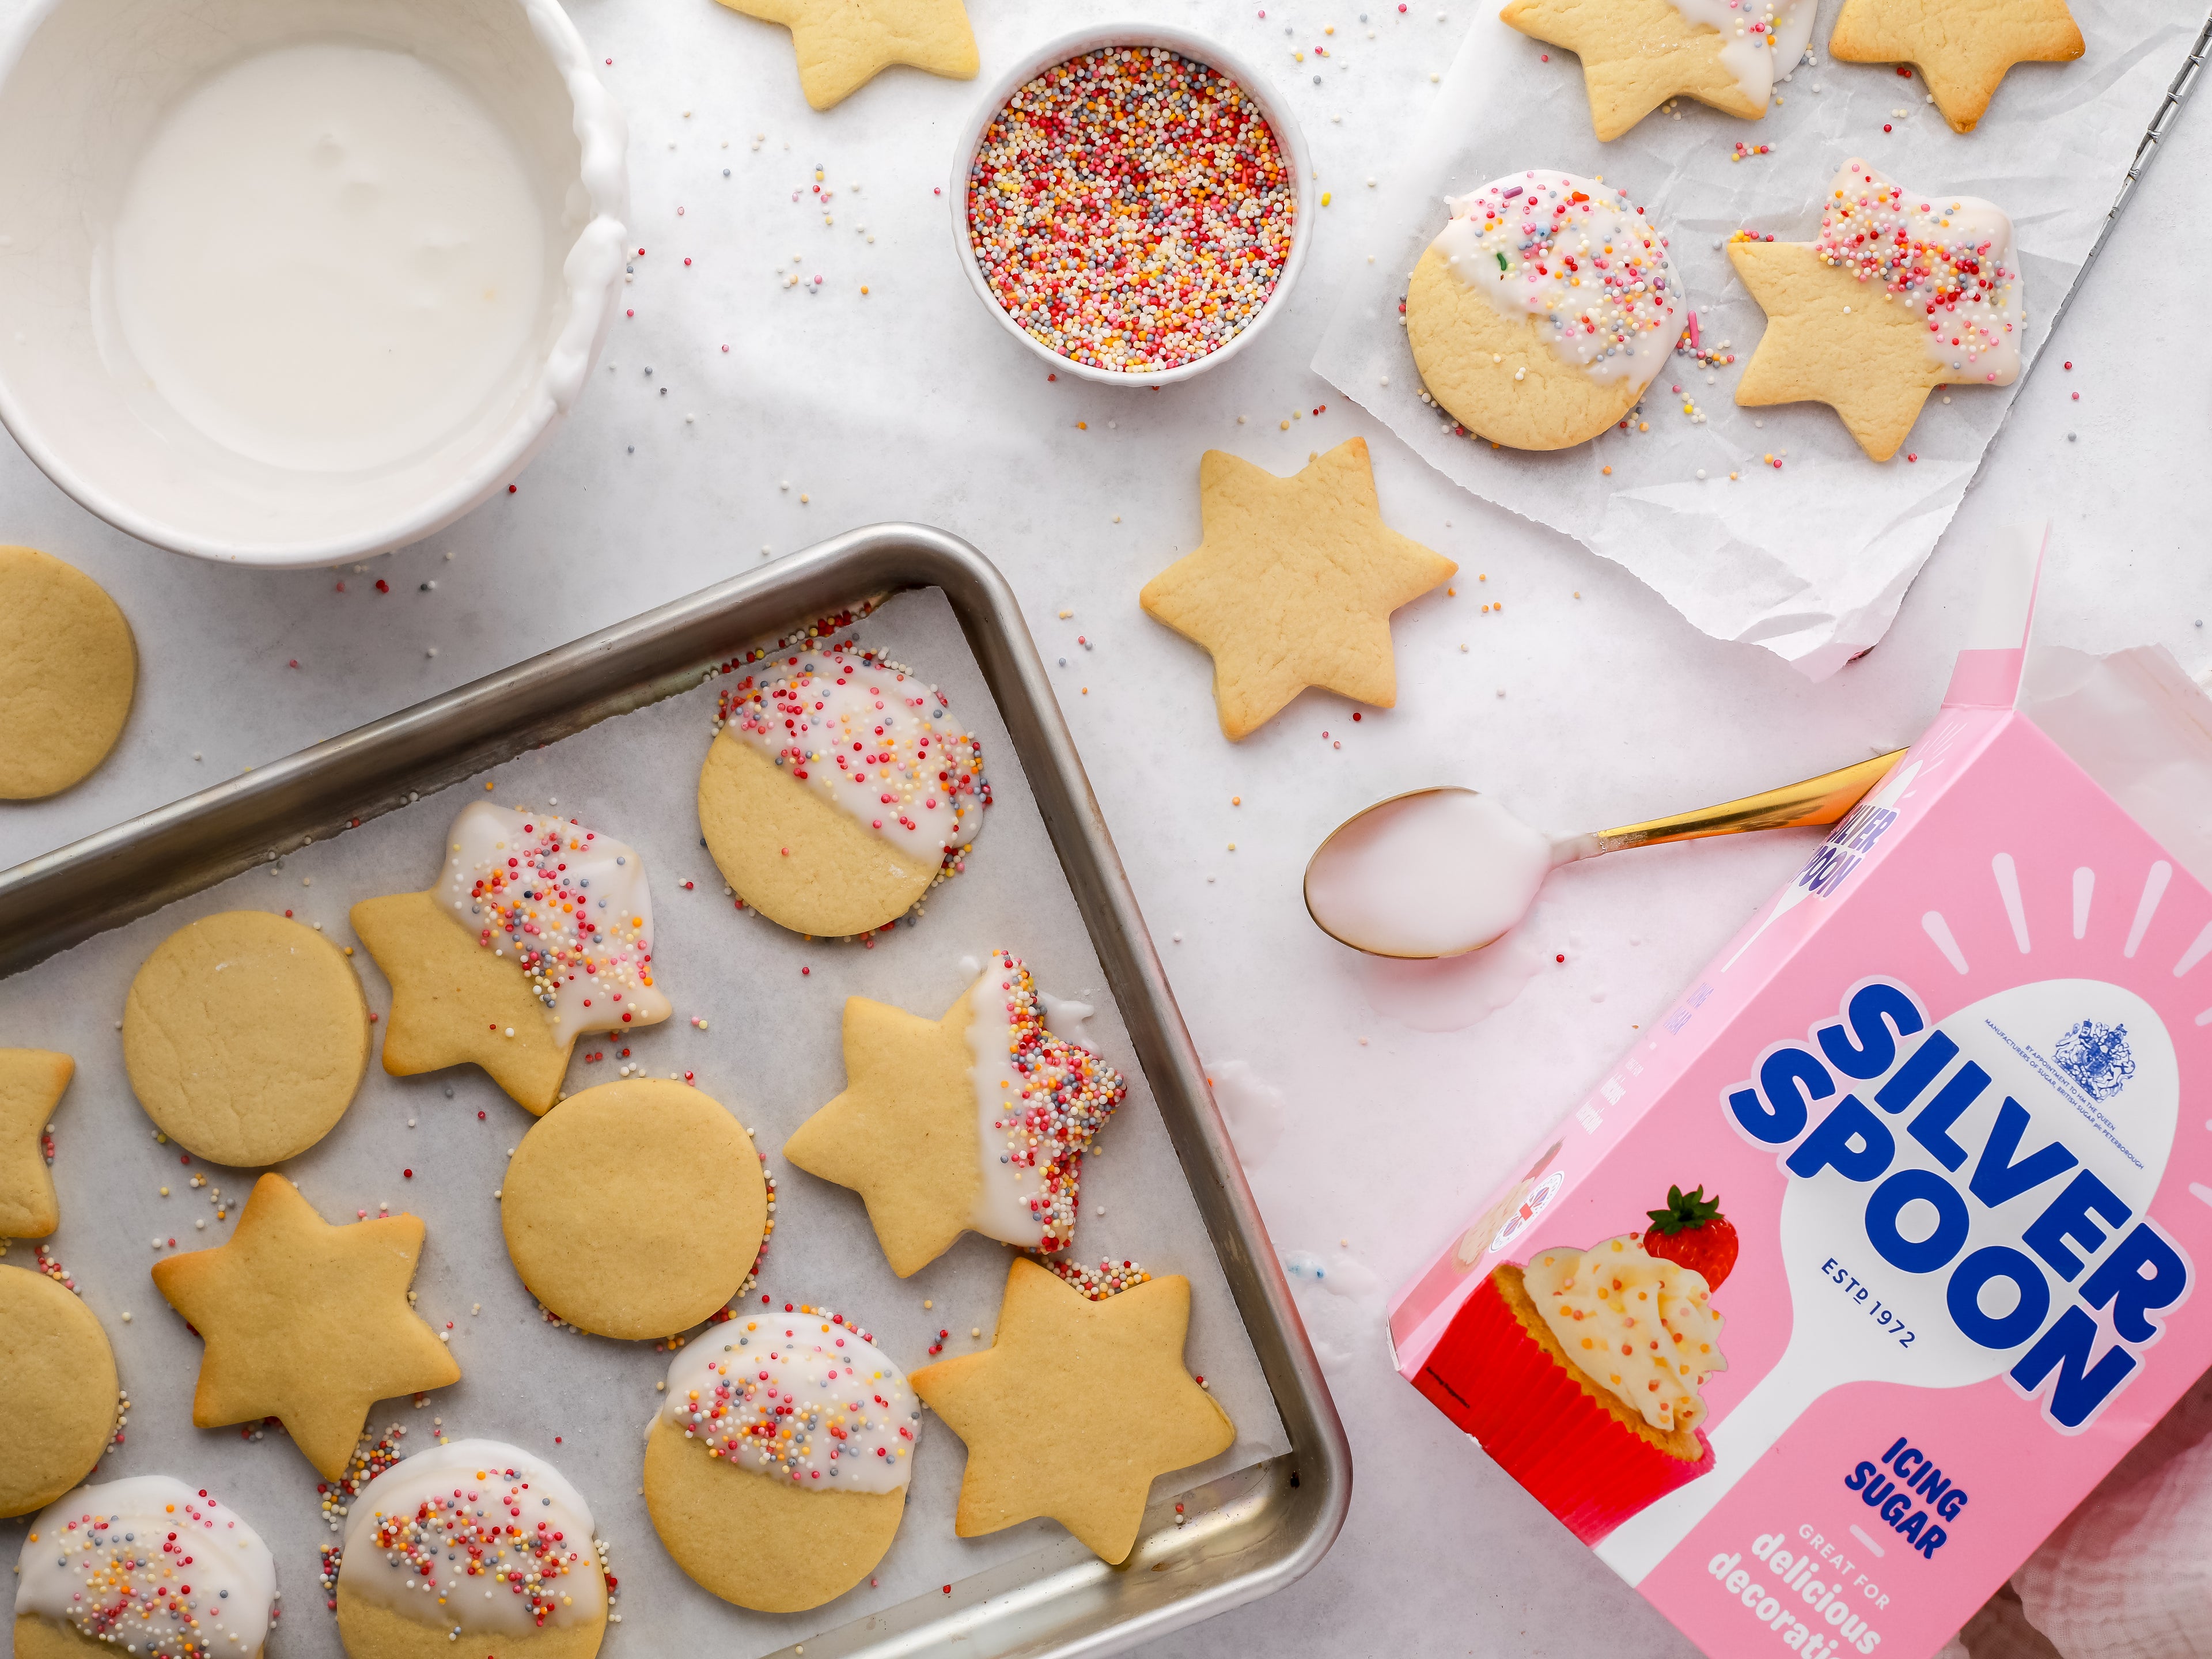 Biscuits decorated with icing and sprinkles on a baking tray beside icing sugar pack